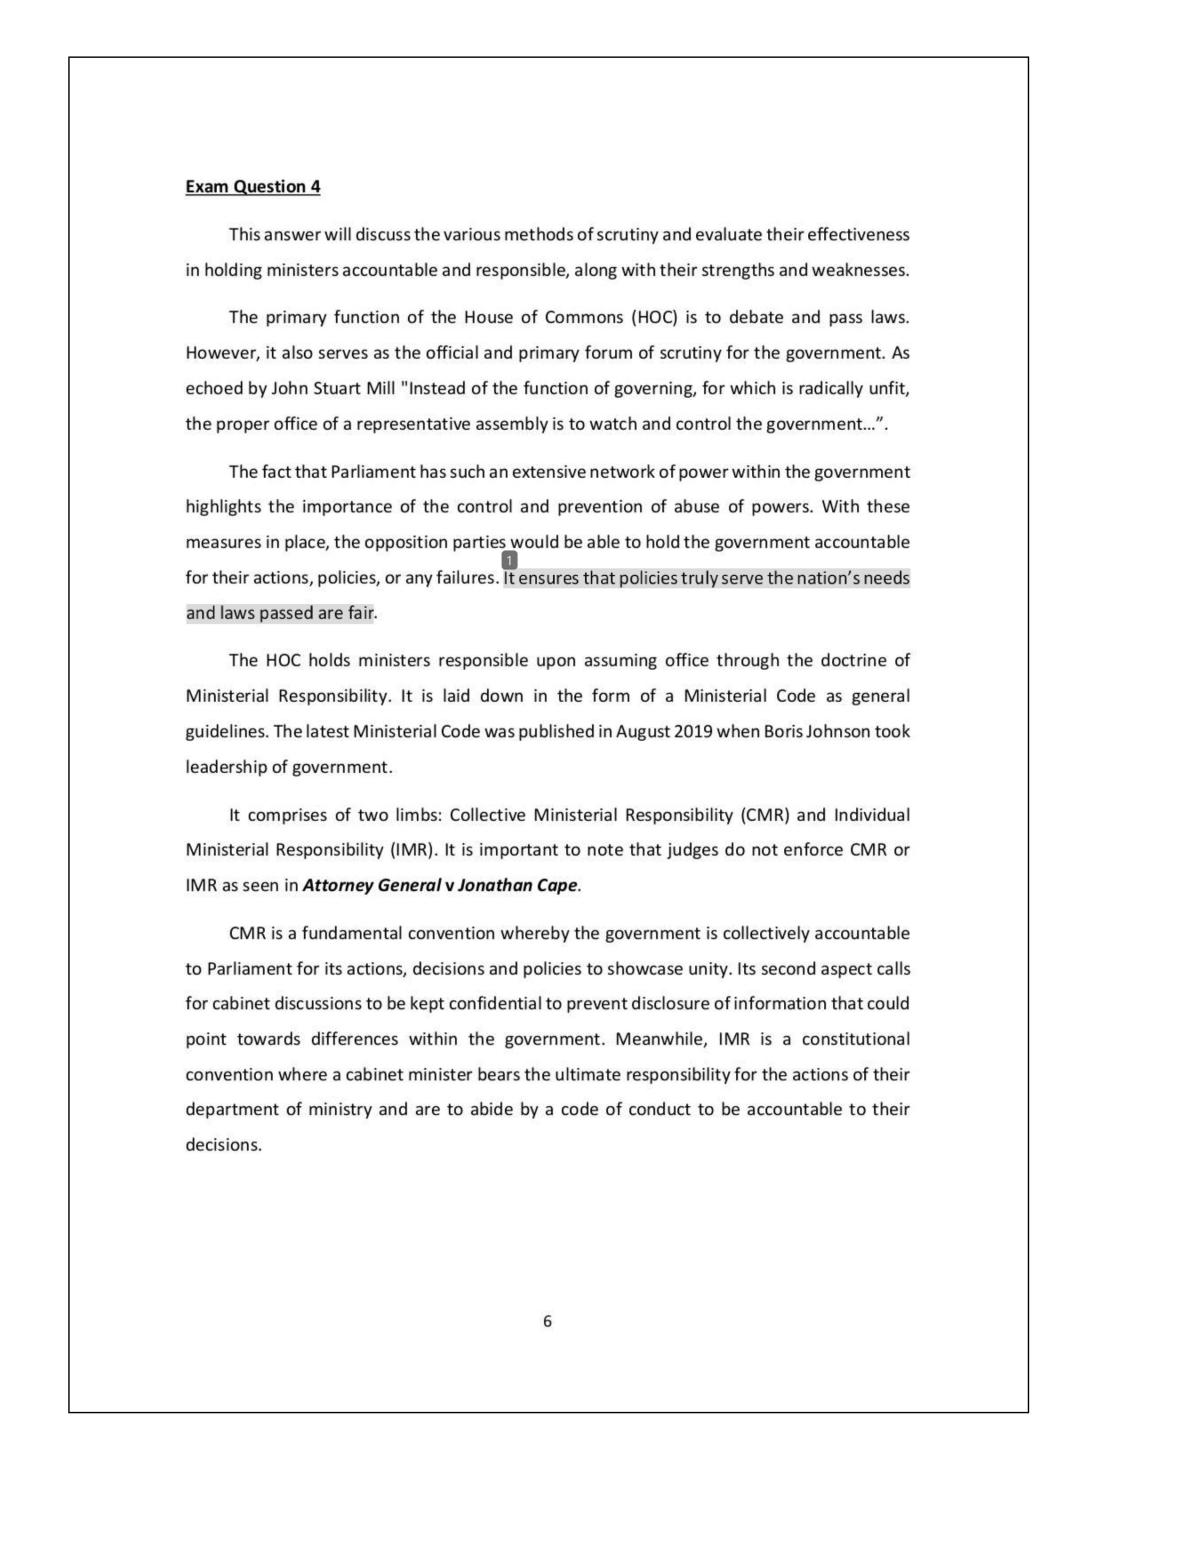 Public Law Various Methods of Scrutiny Essay - Page 1